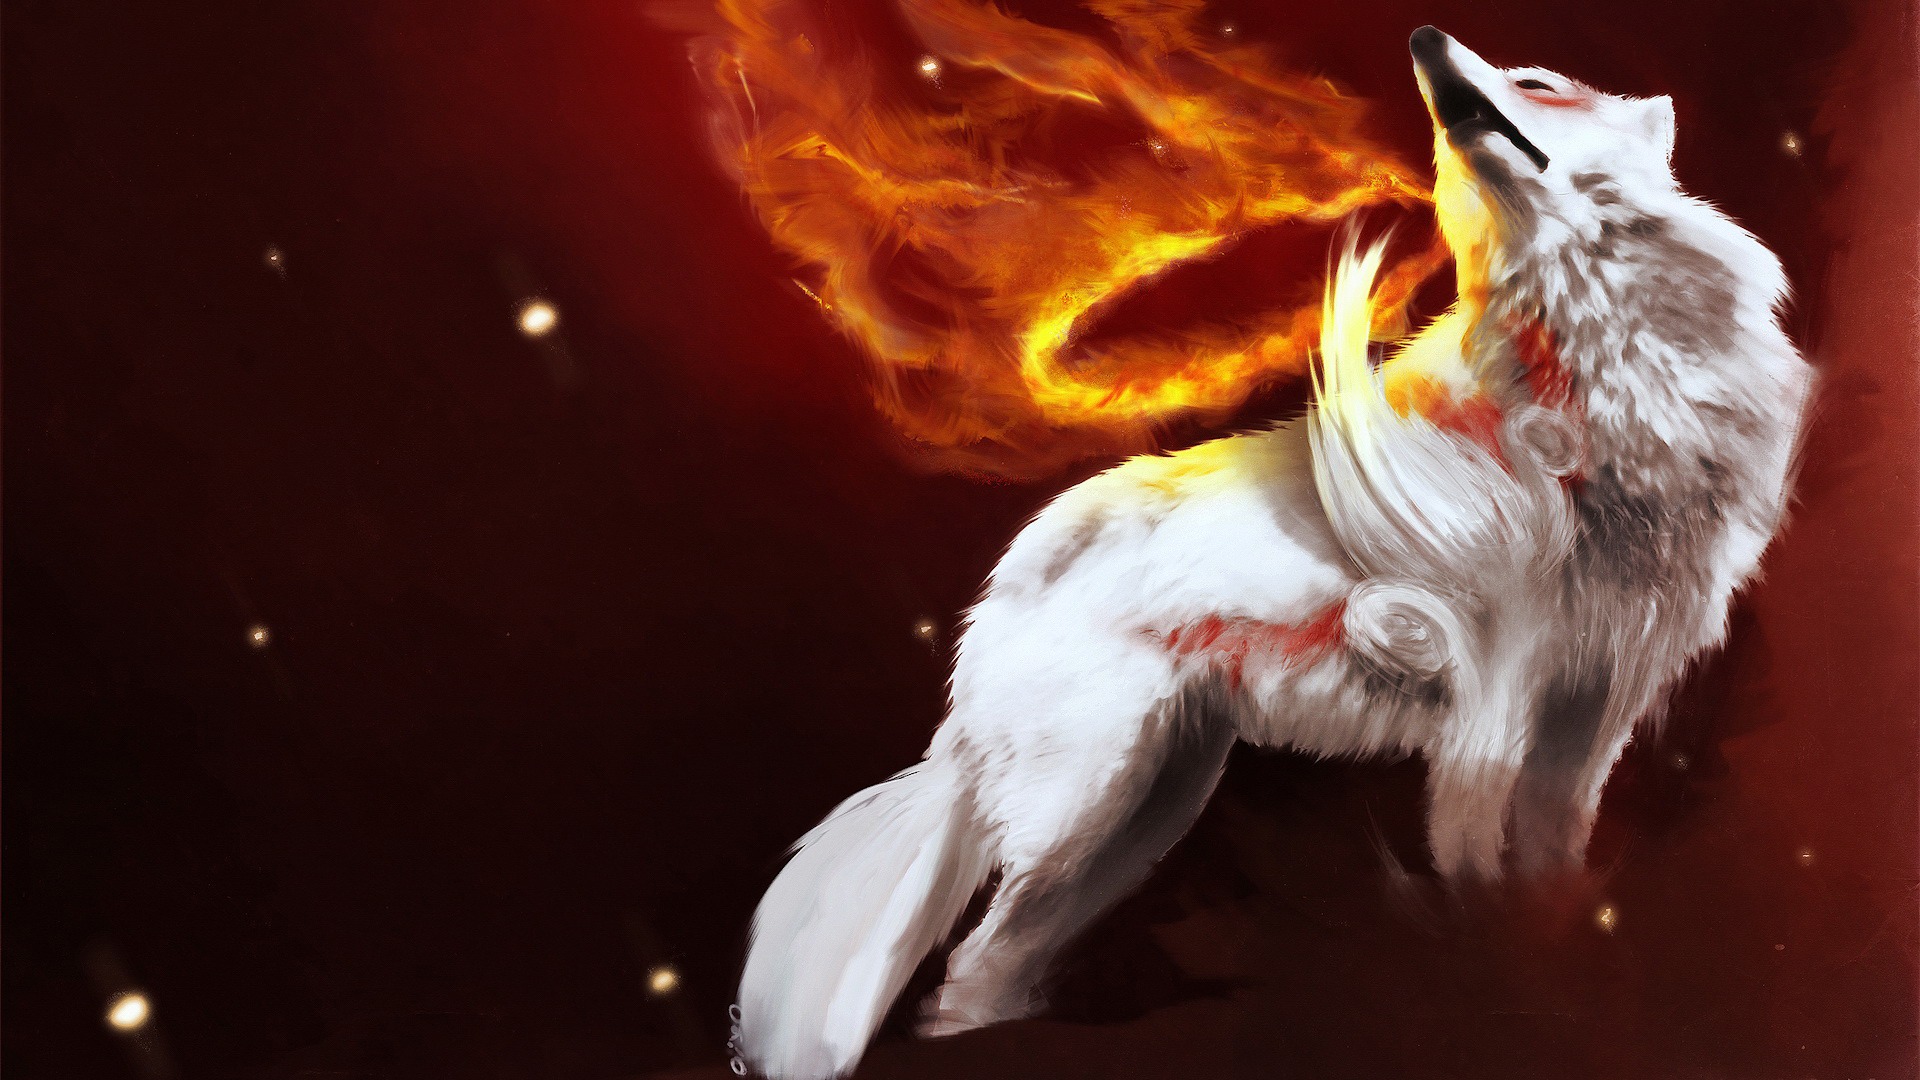 Okami Wallpaper Japanese Characters Anime Animated Wallpapers In